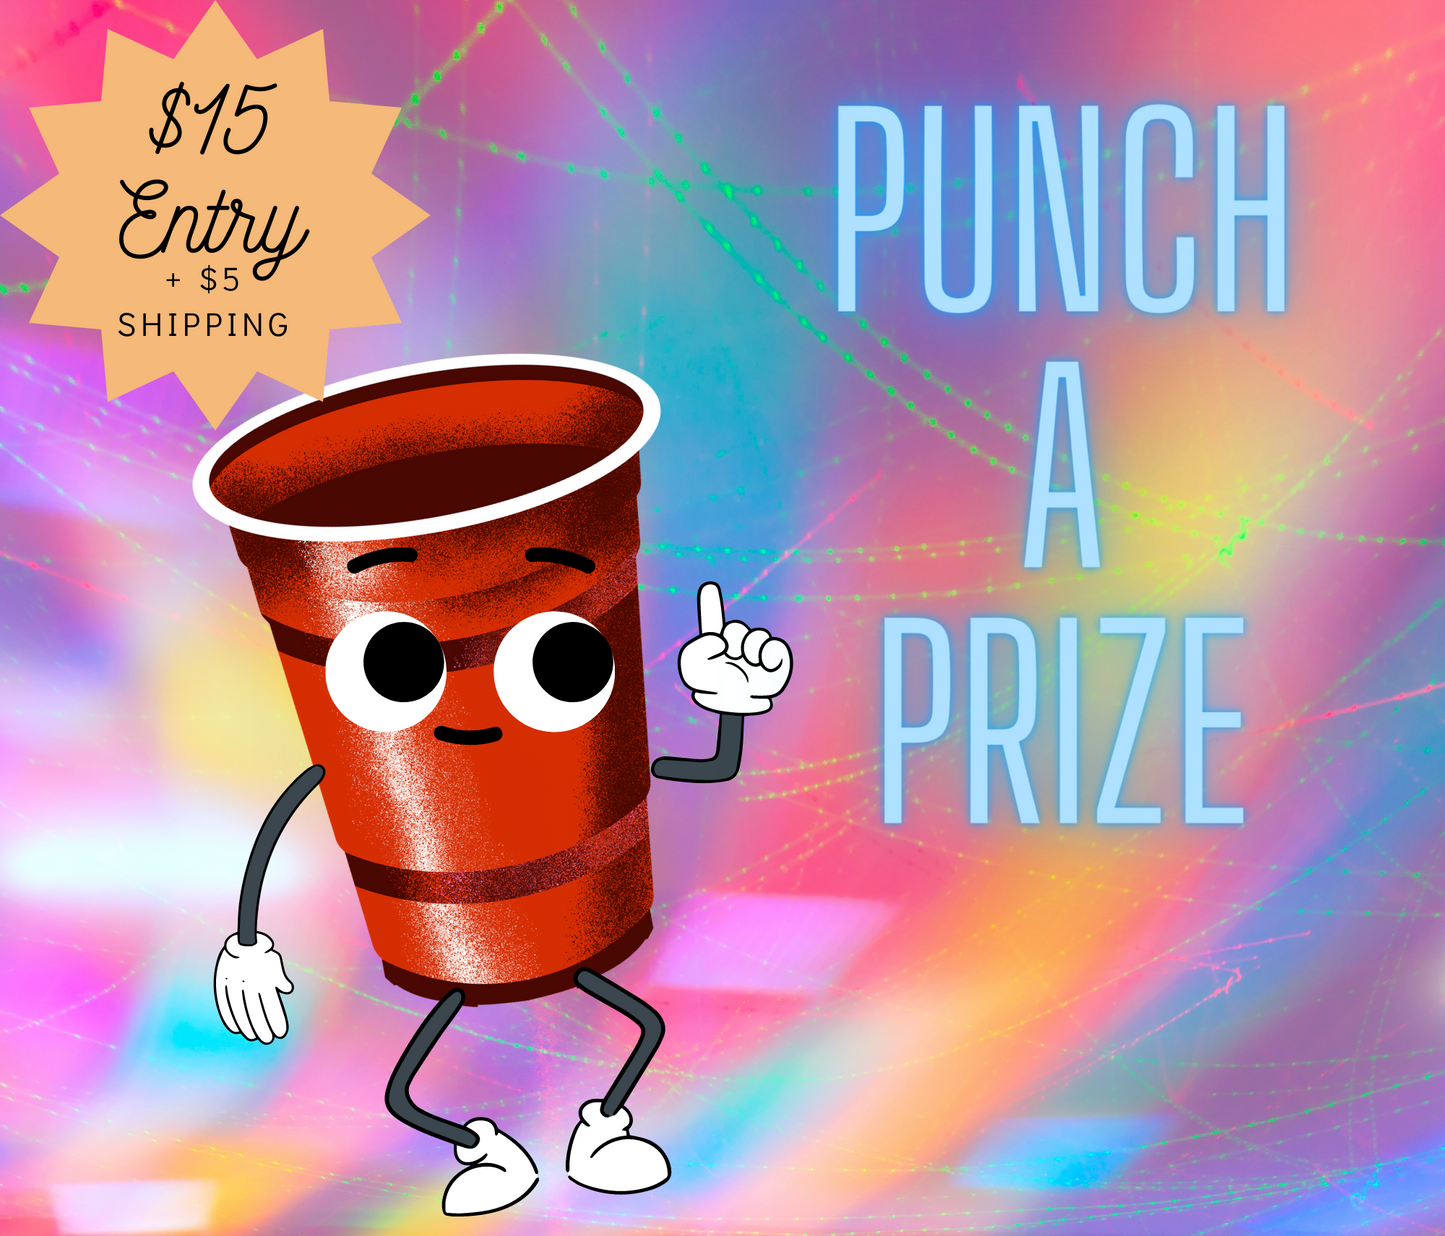 Punch A Prize $15 Entry